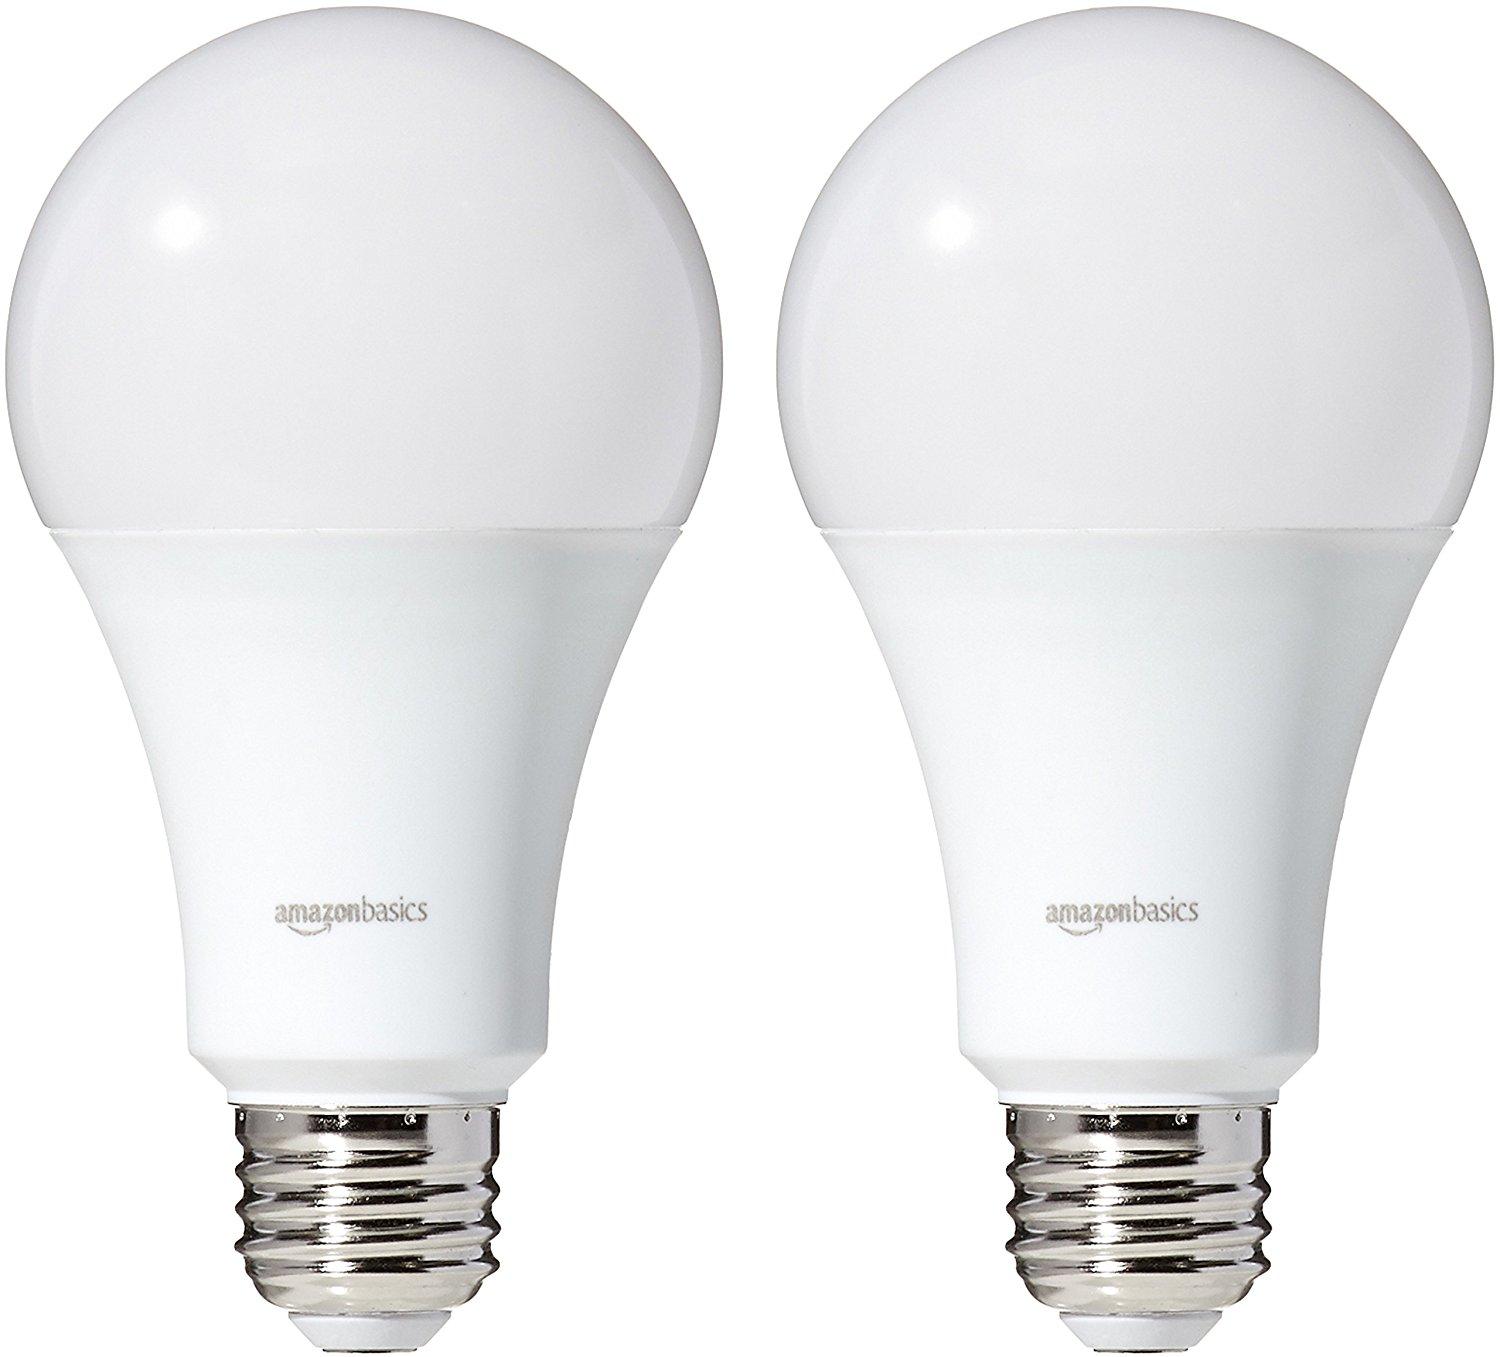 What LED Bulb Is Equal To 100 Watts